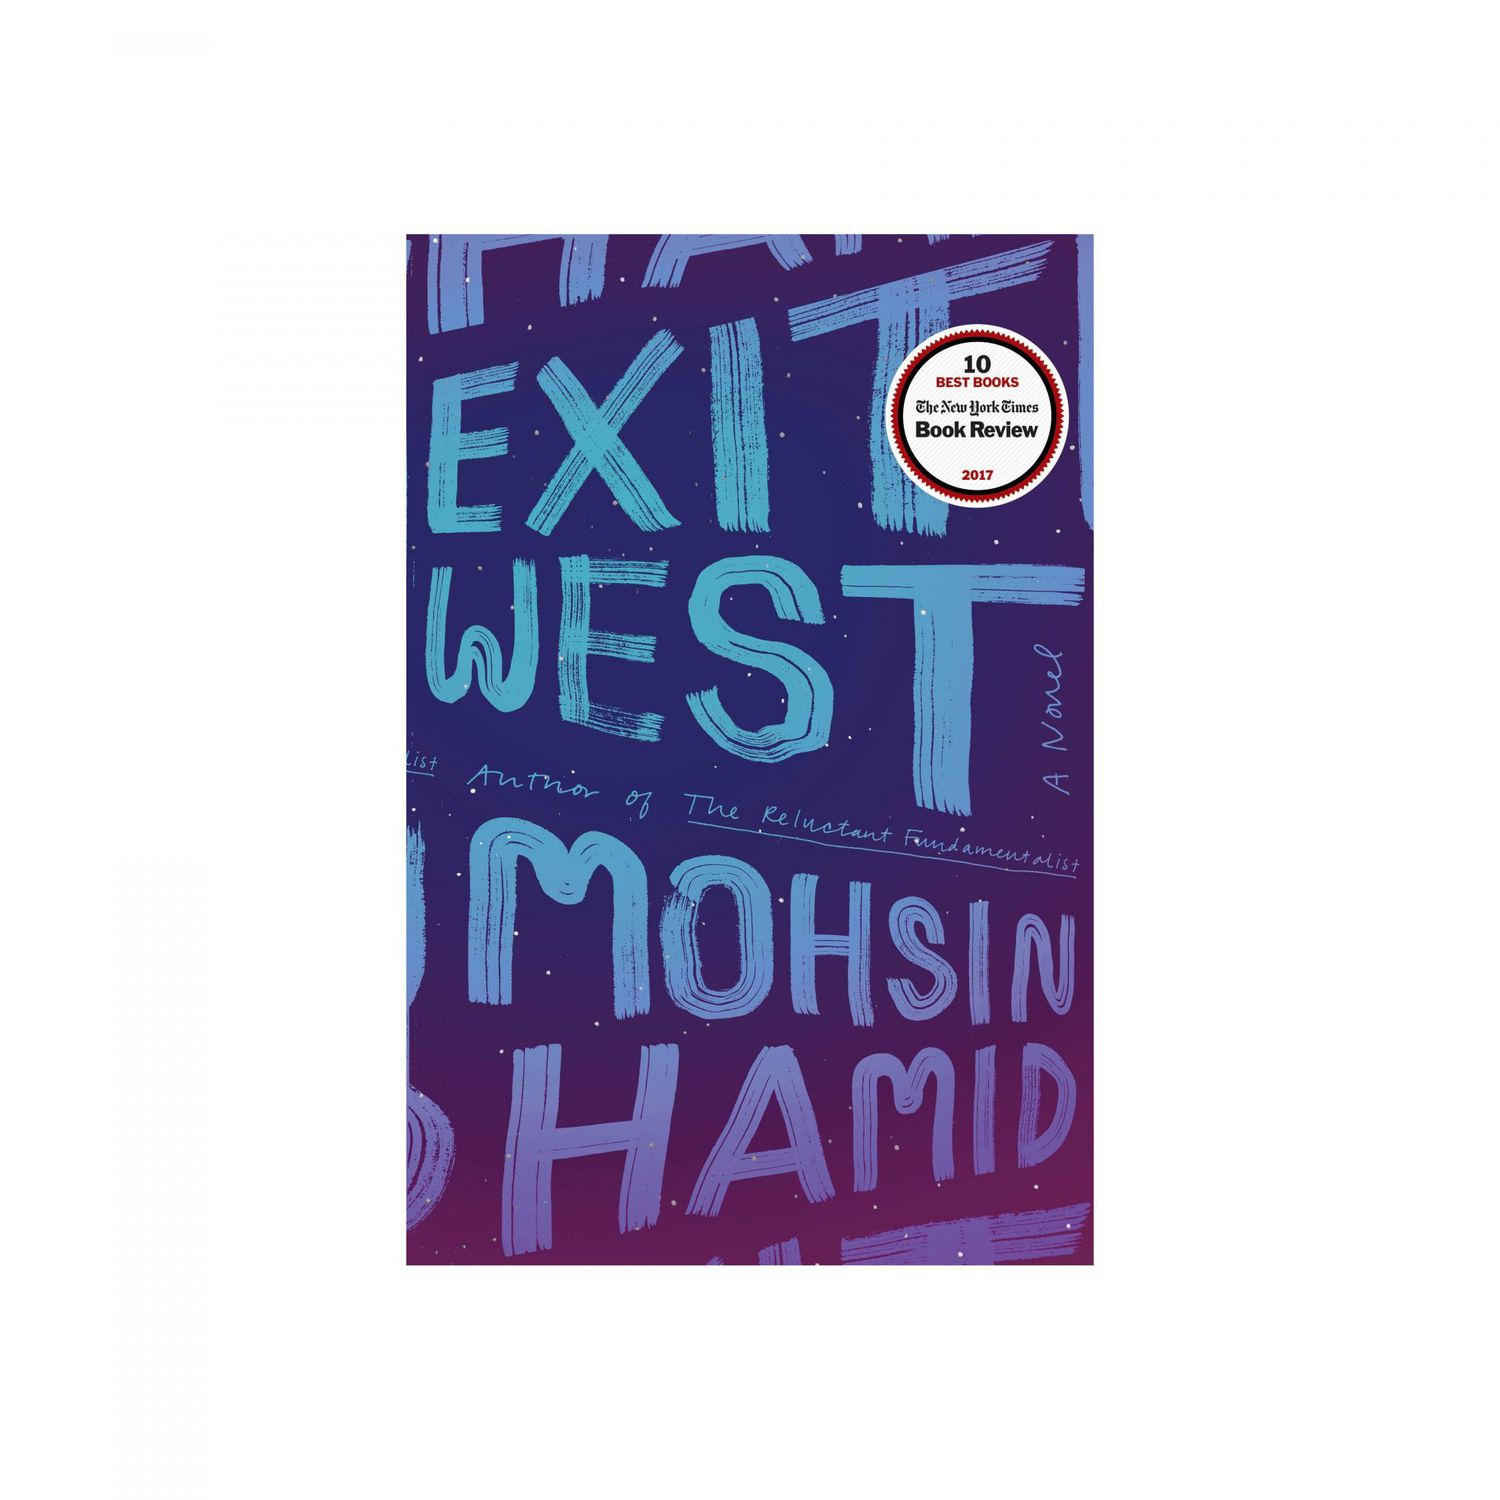 Exit West, by Mohsin Hamid